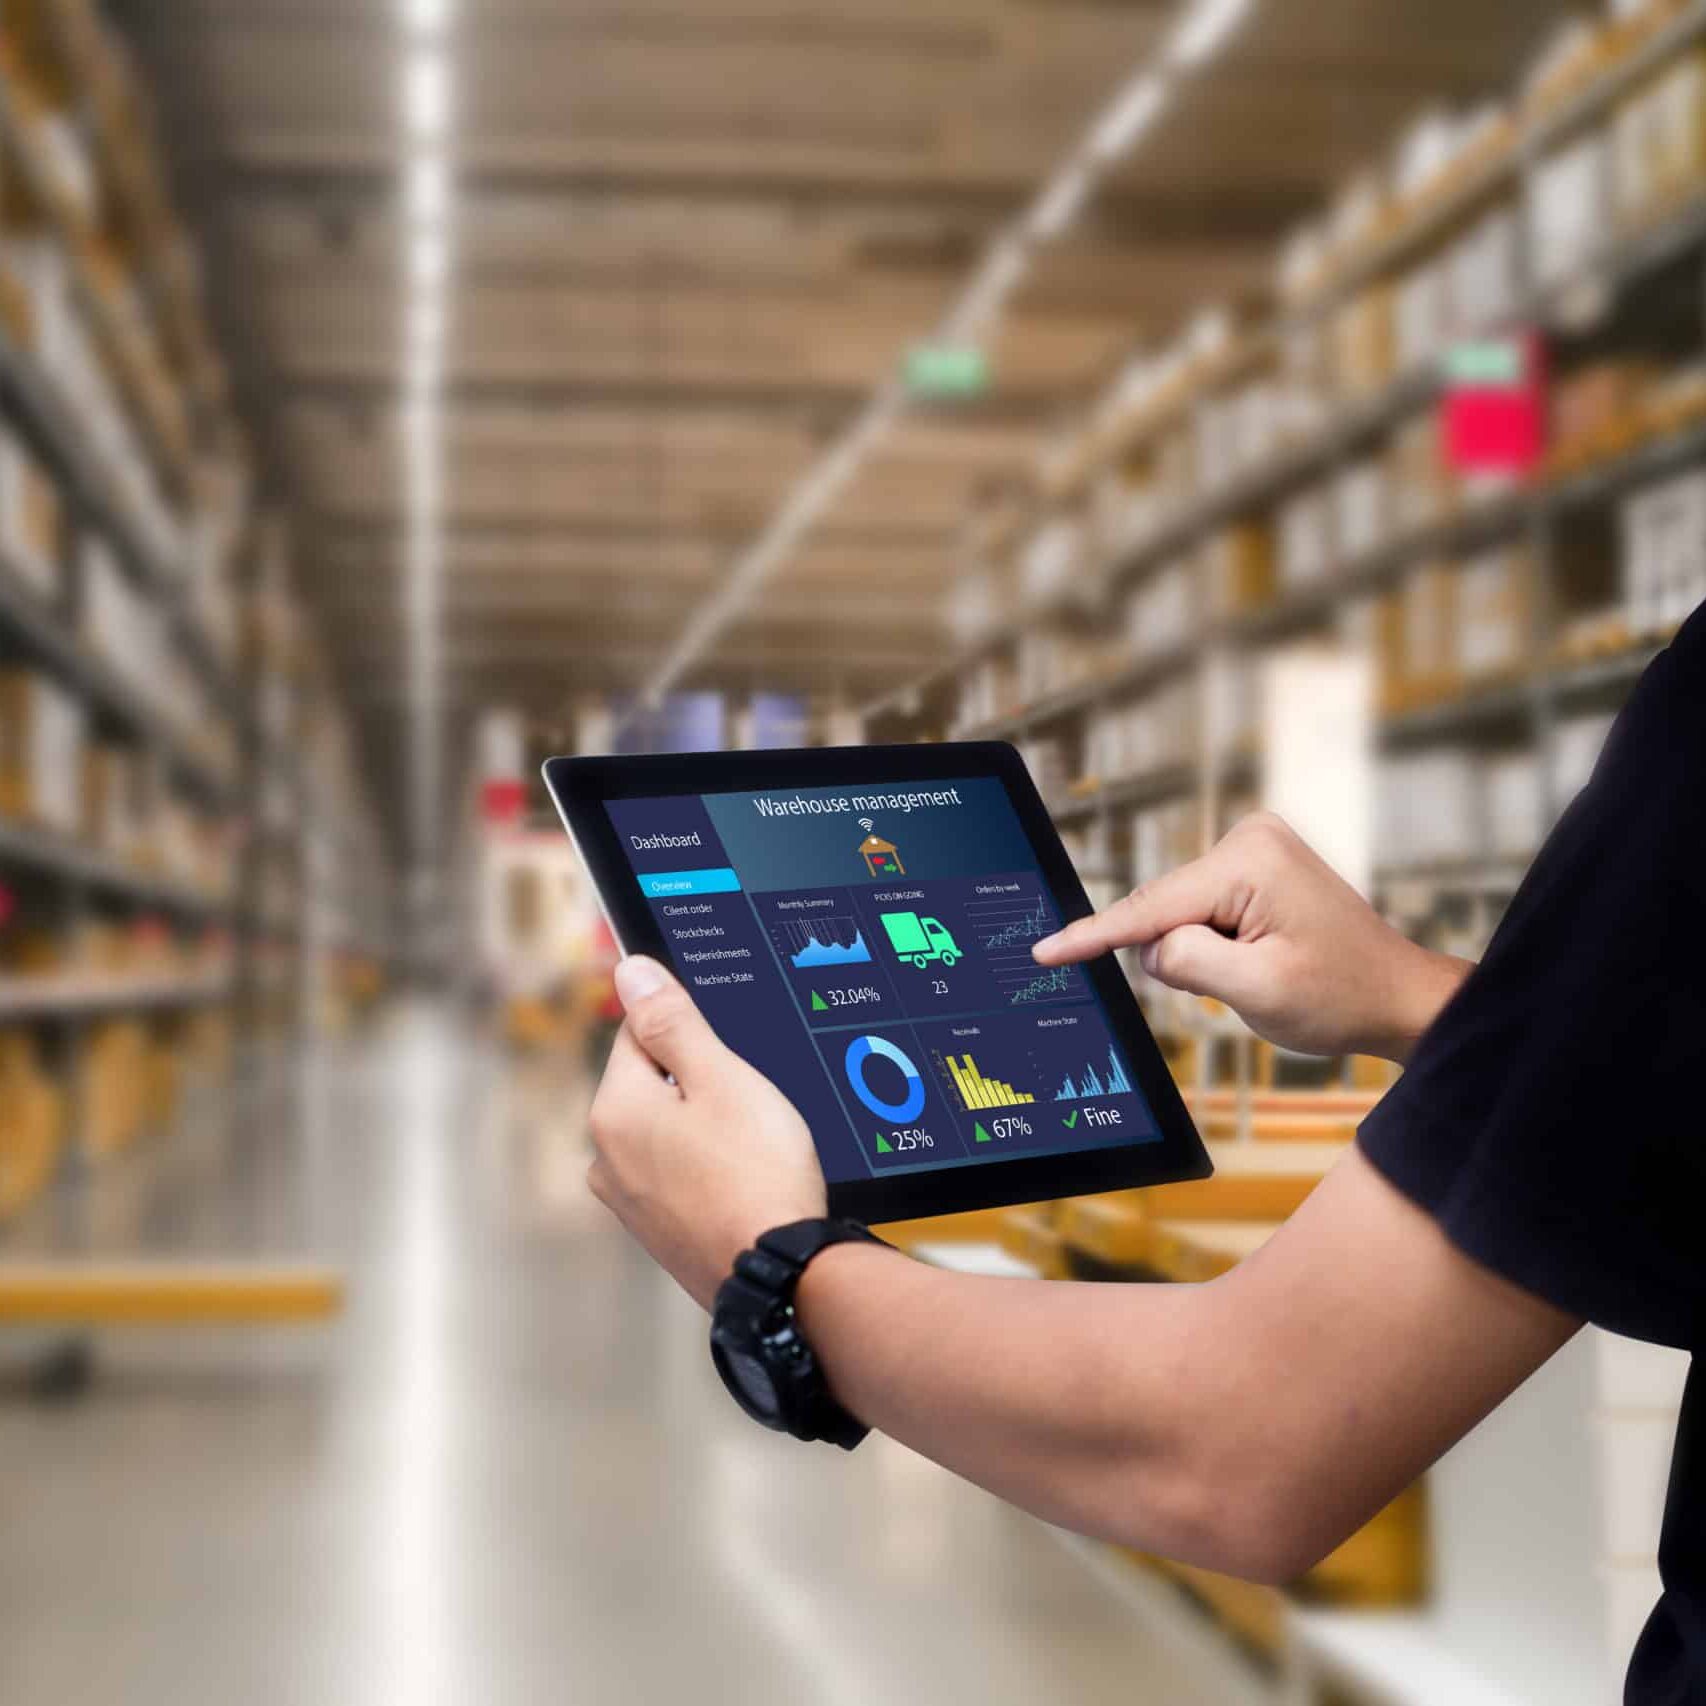 A supervisor stands in a warehouse, holding a smart device and reviewing a warehouse management app for inventory tracking and logistics monitoring.